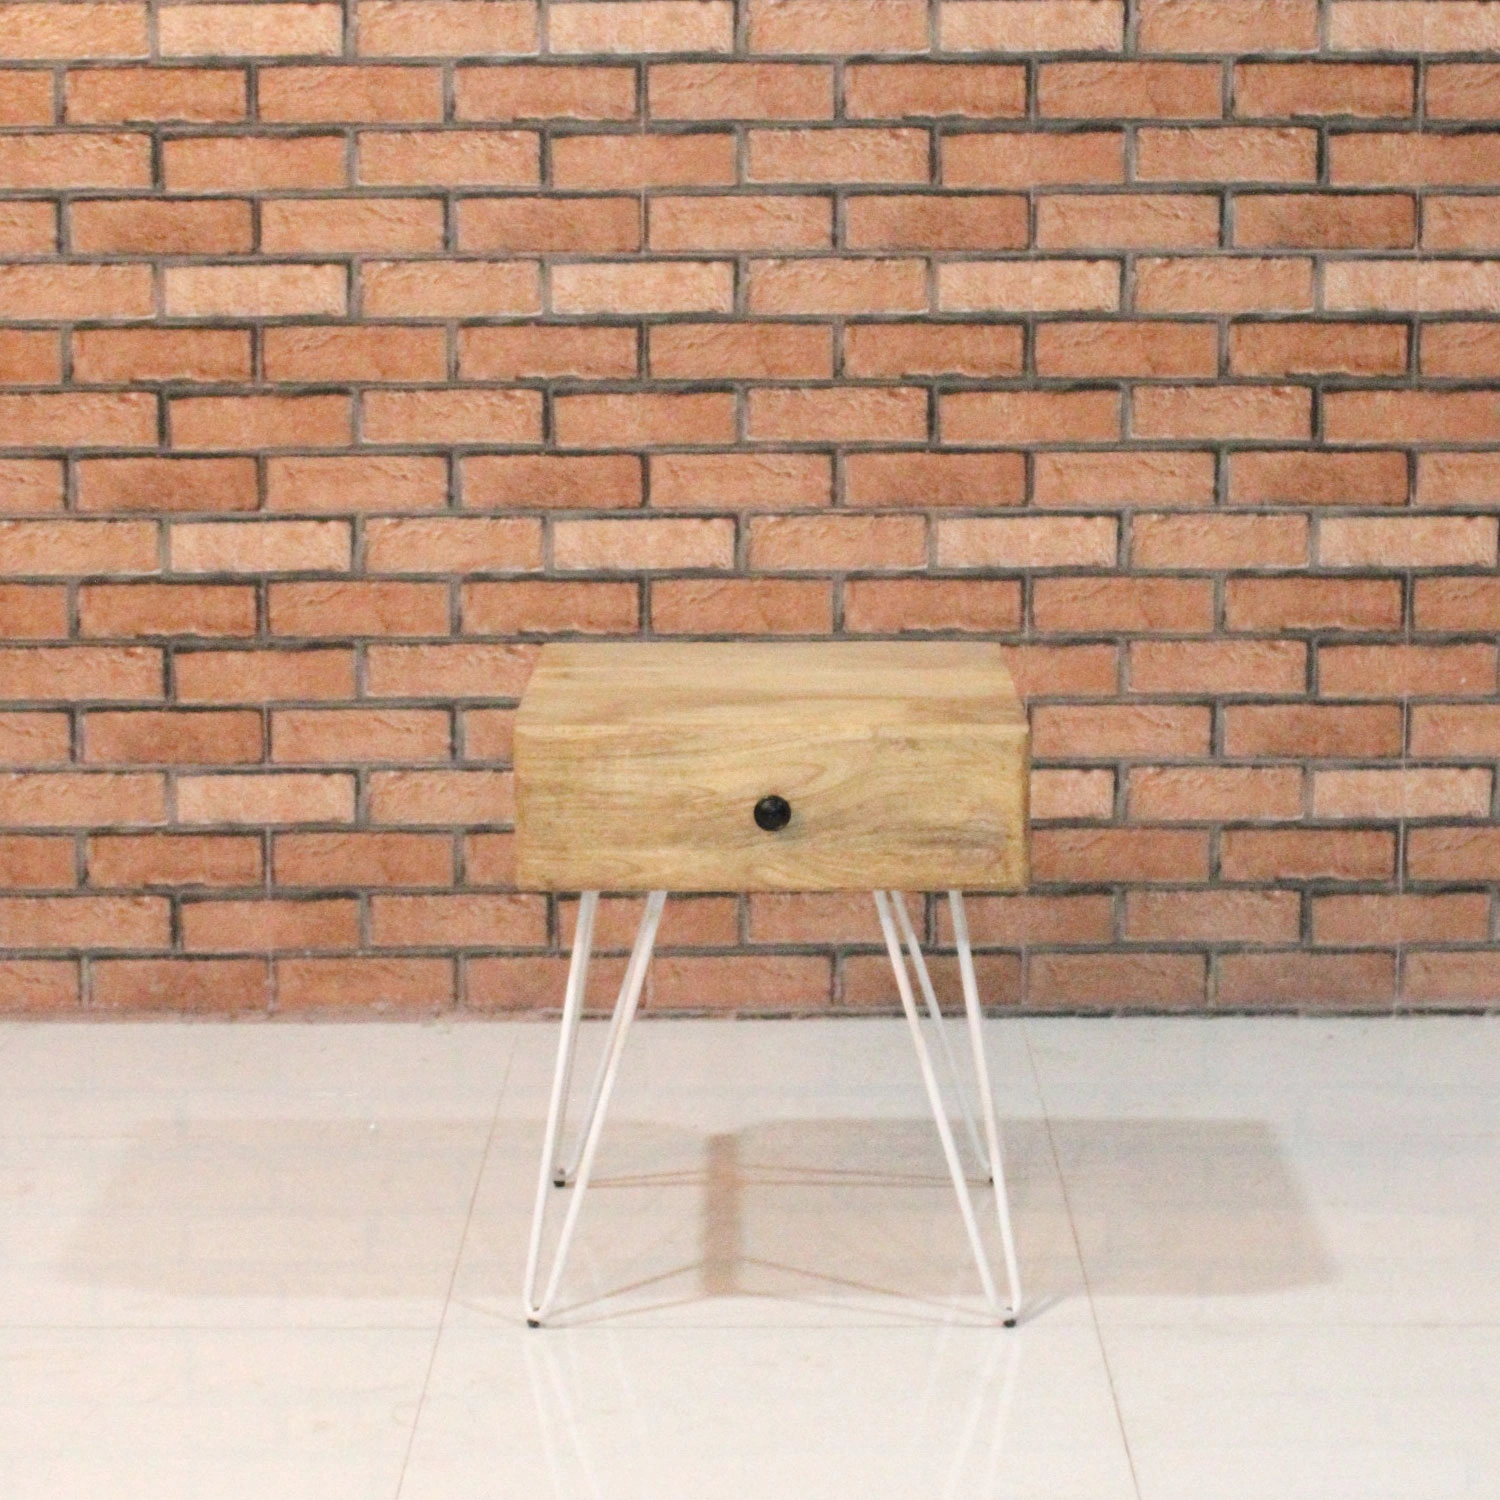 Mango & Iron Side Table with 1 Drawers & Iron Hairpin Legs (KD) - popular handicrafts